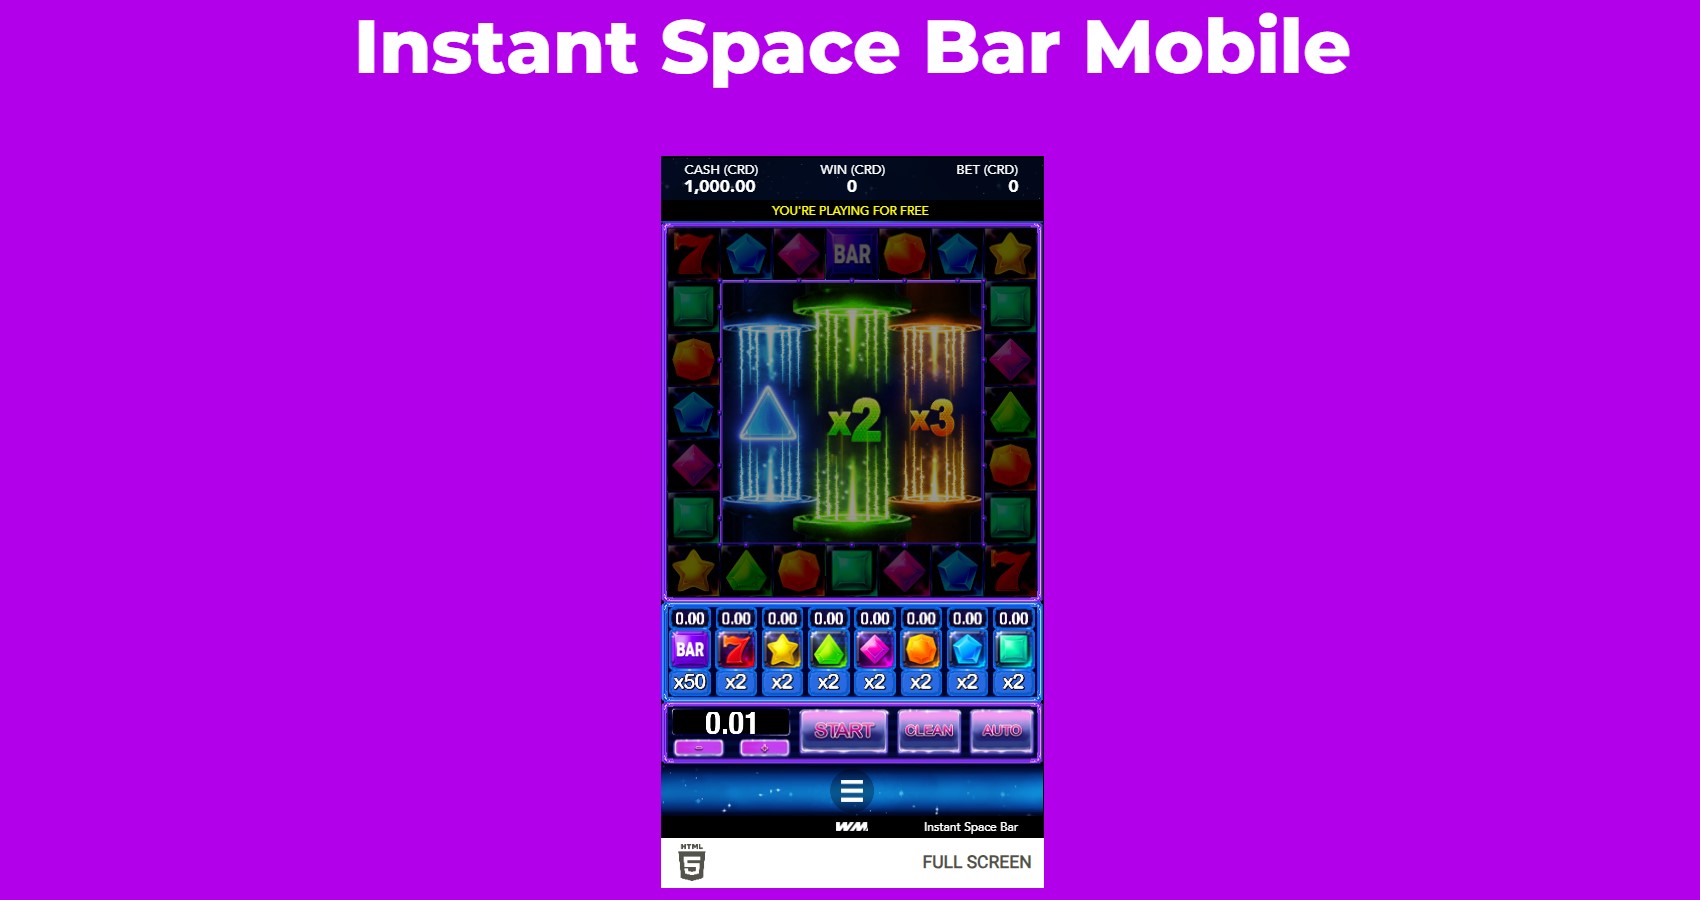 Instant Space Bar Mobiiliversio